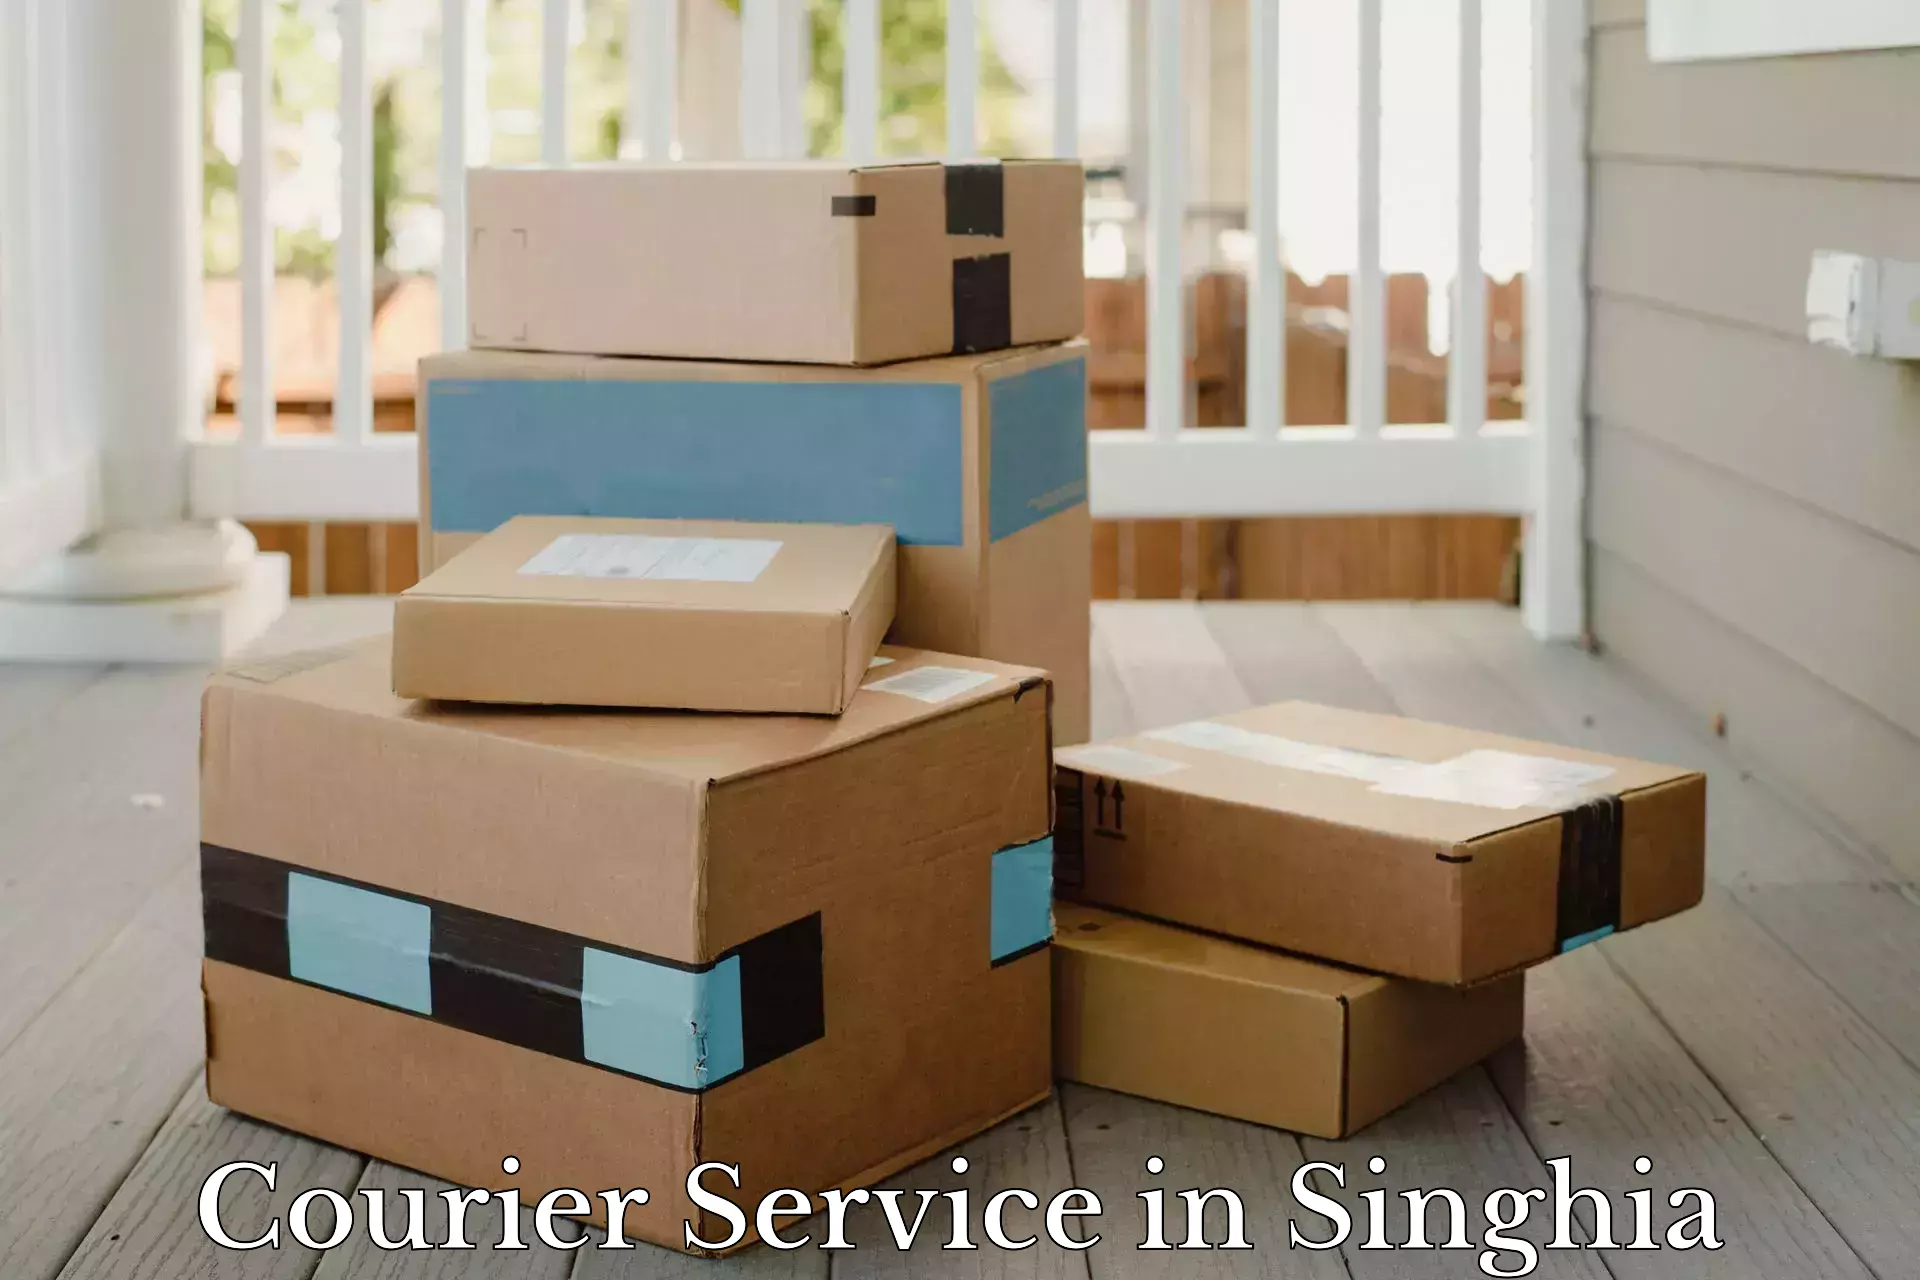 Courier insurance in Singhia